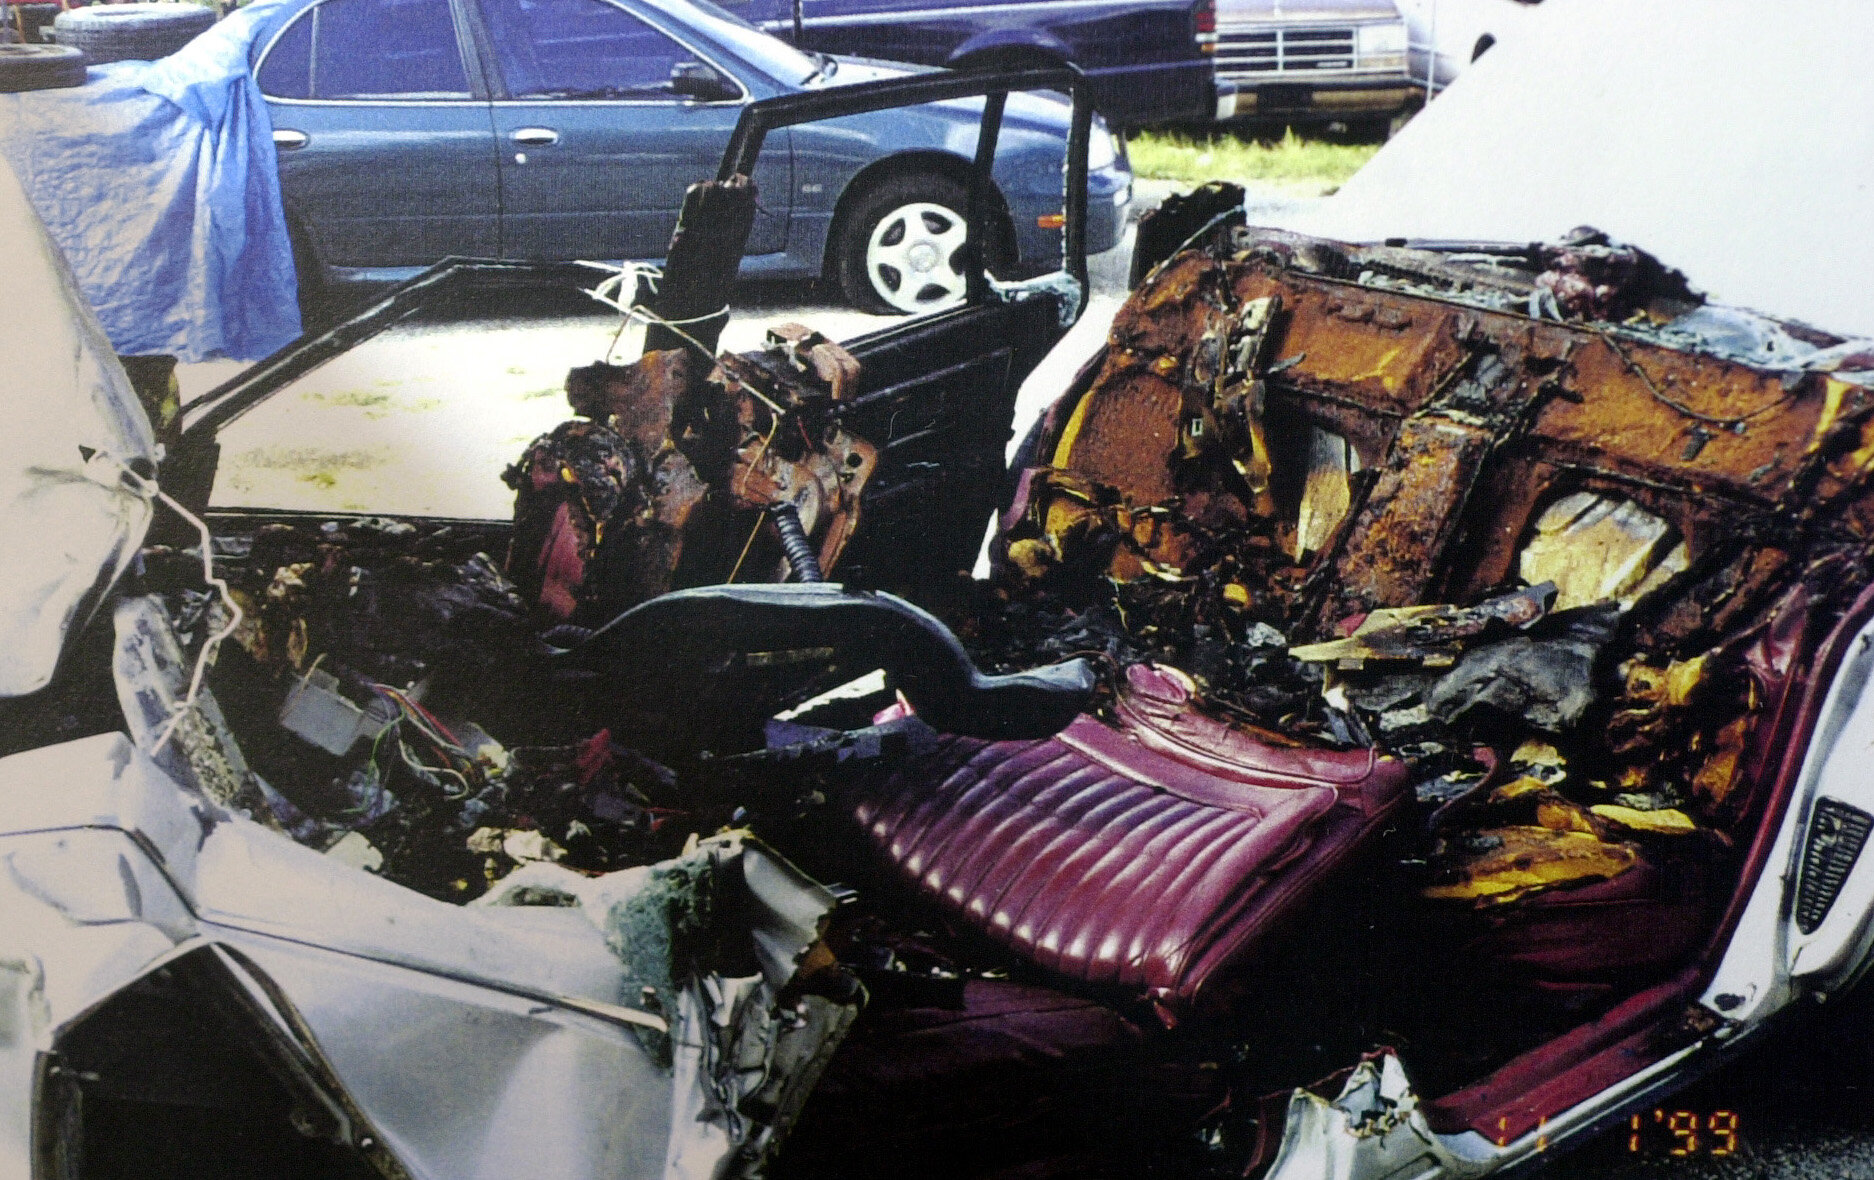  Rescue crews had to use the Jaws of Life to rip apart the Oldsmobile, above, driven by Natalia Chpytchak Bennett, who was killed. Jacqui was in the passenger seat. Laura Guerrero, who also died, was in the back with Johanna Gil and Johan Daal, who w